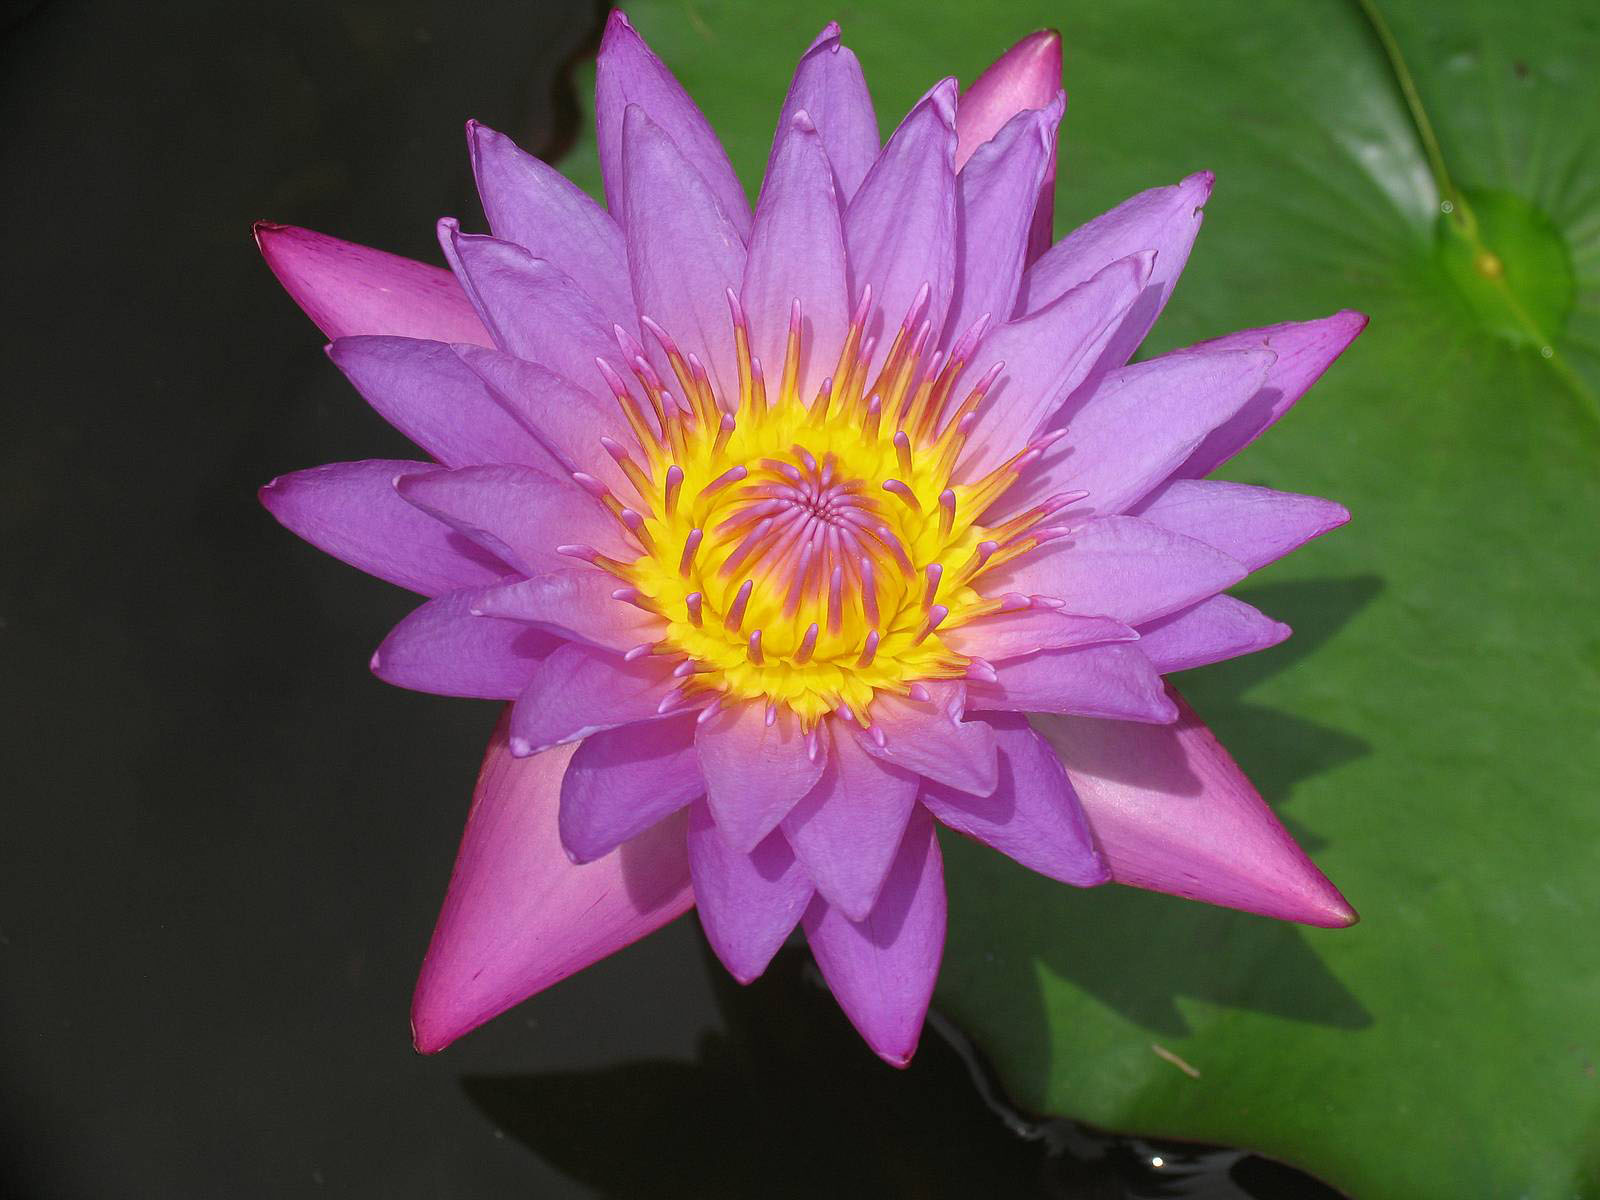 Water Lily Flowers Wallpaper Image Photos And Pictures For